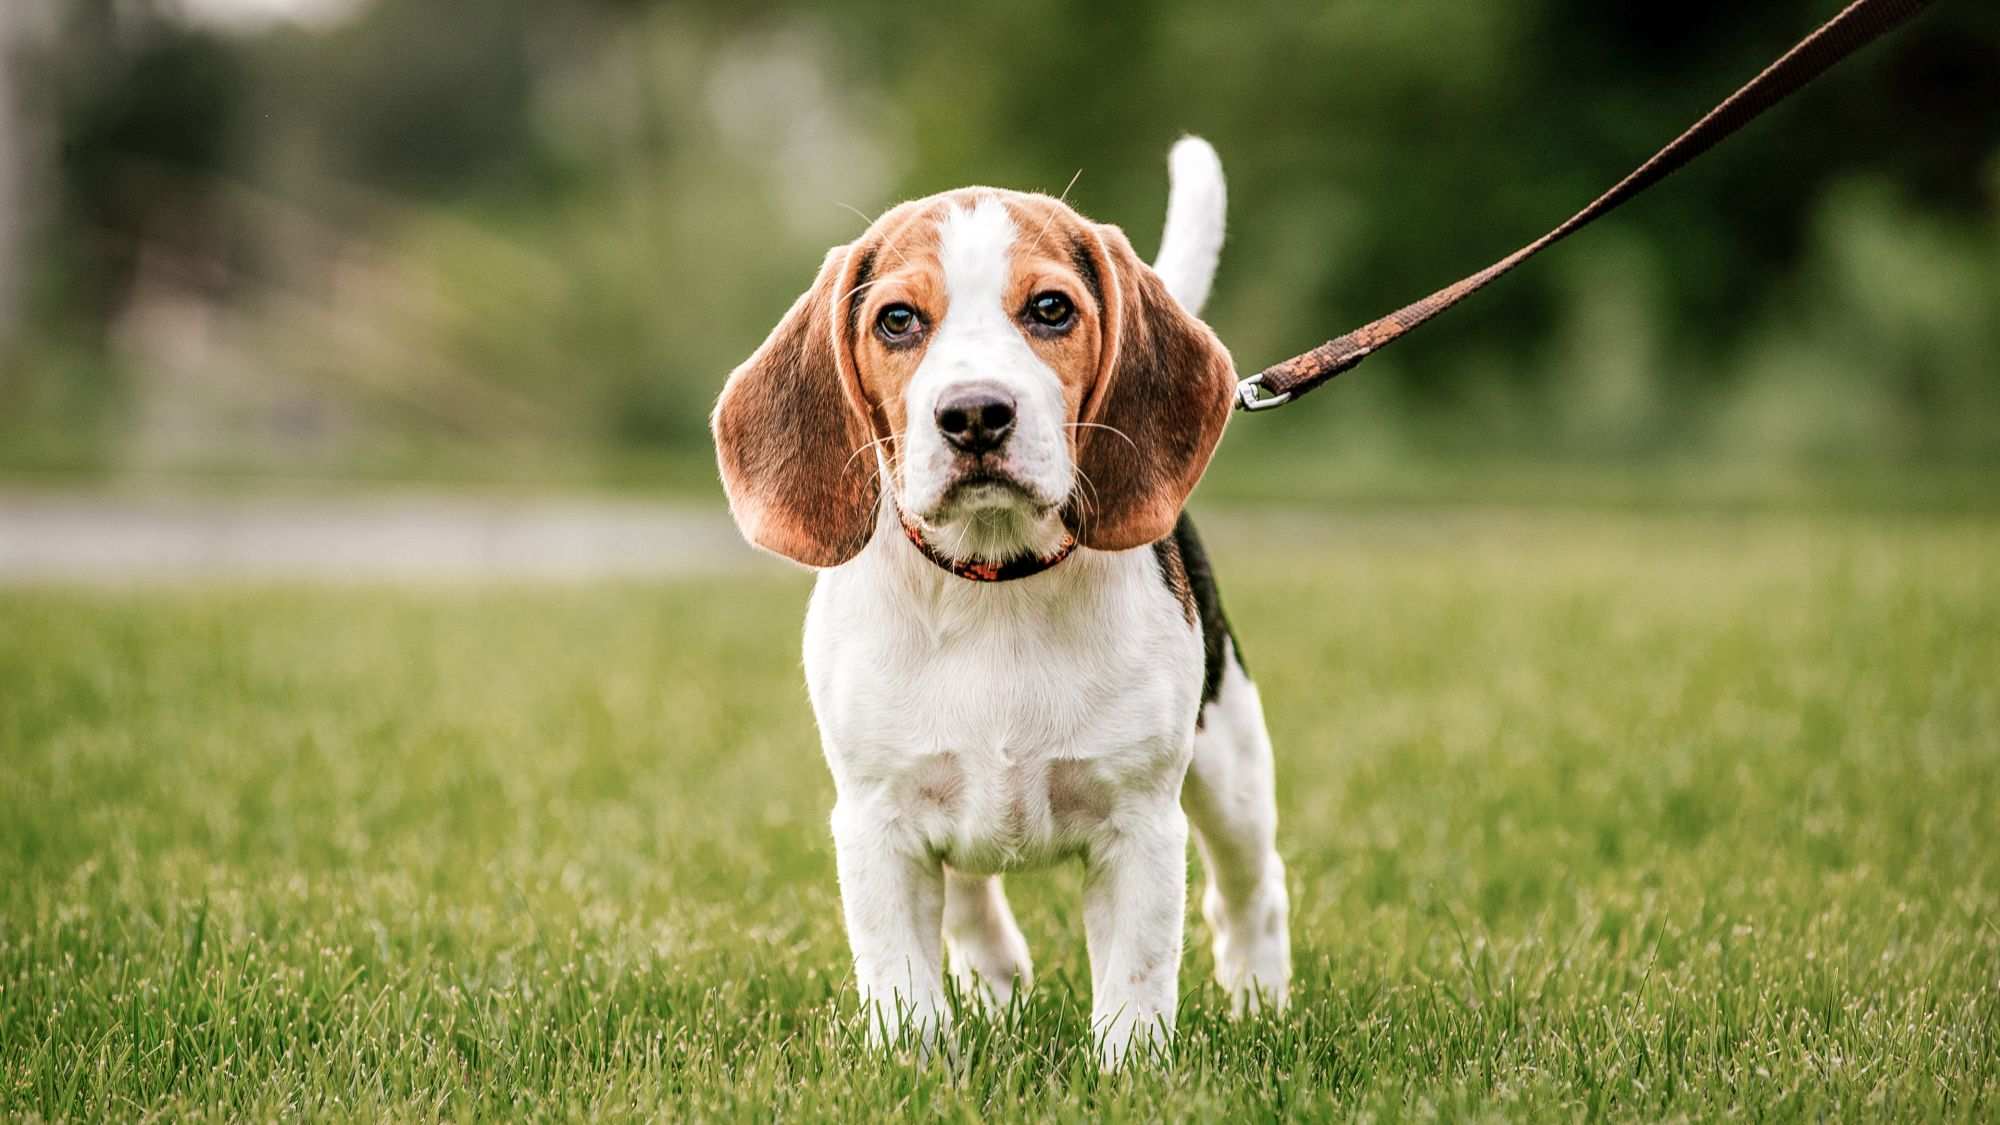 Beagle puppy standing outdoors on a lead